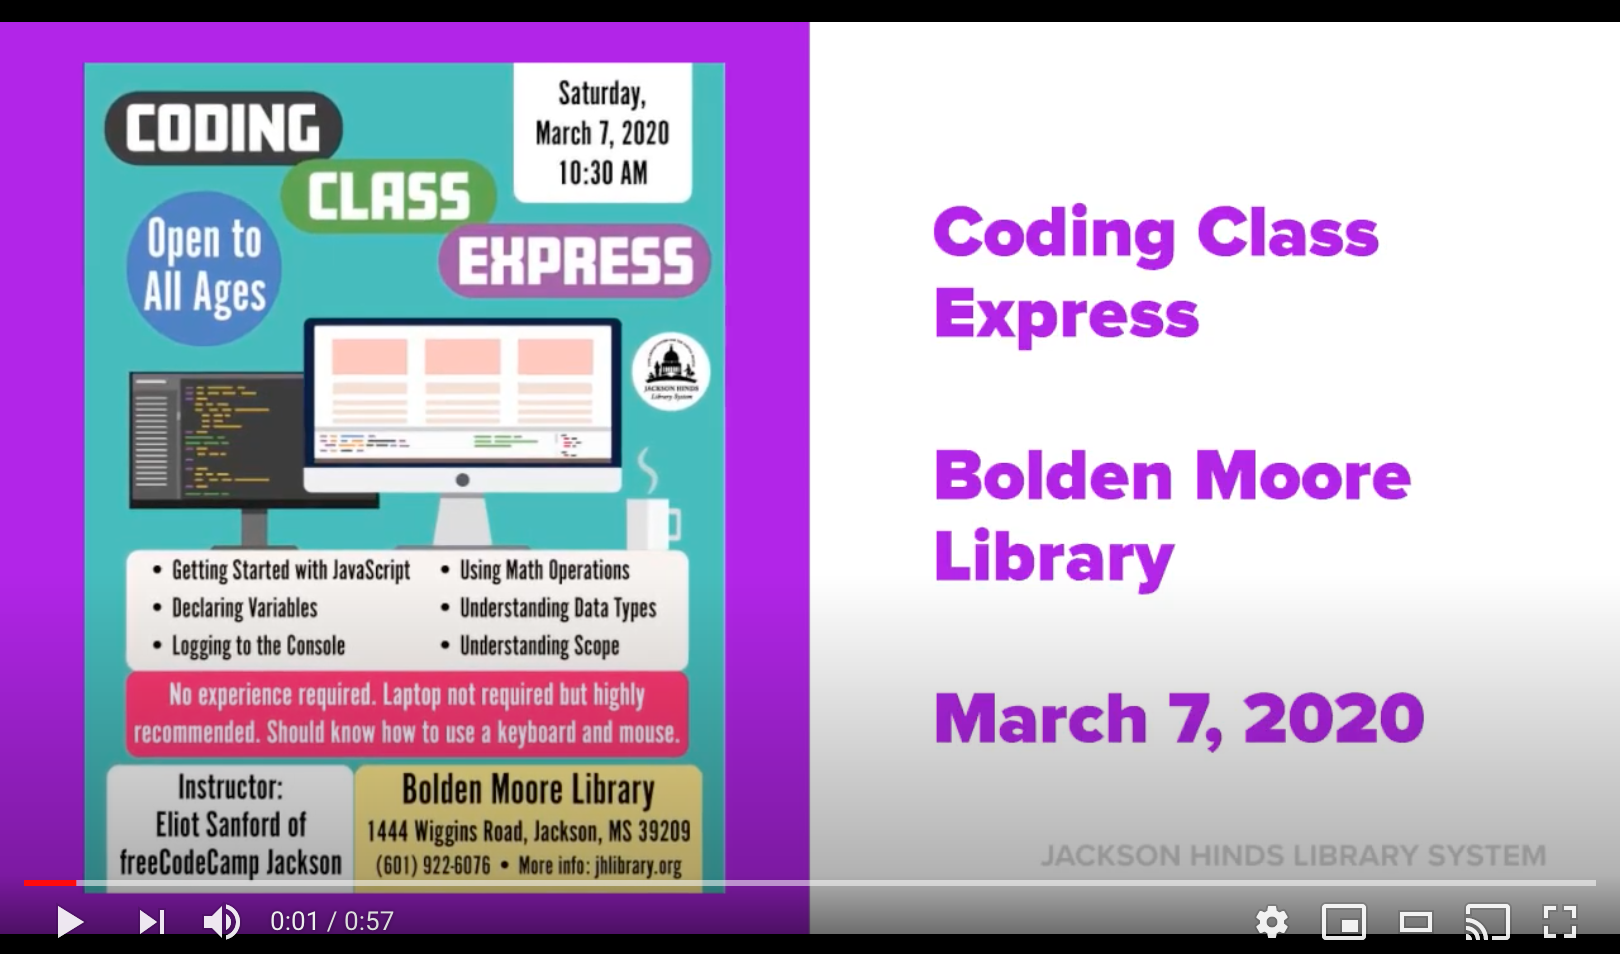 Coding class express poster at the Bolden Moore Library on March 7, 2020